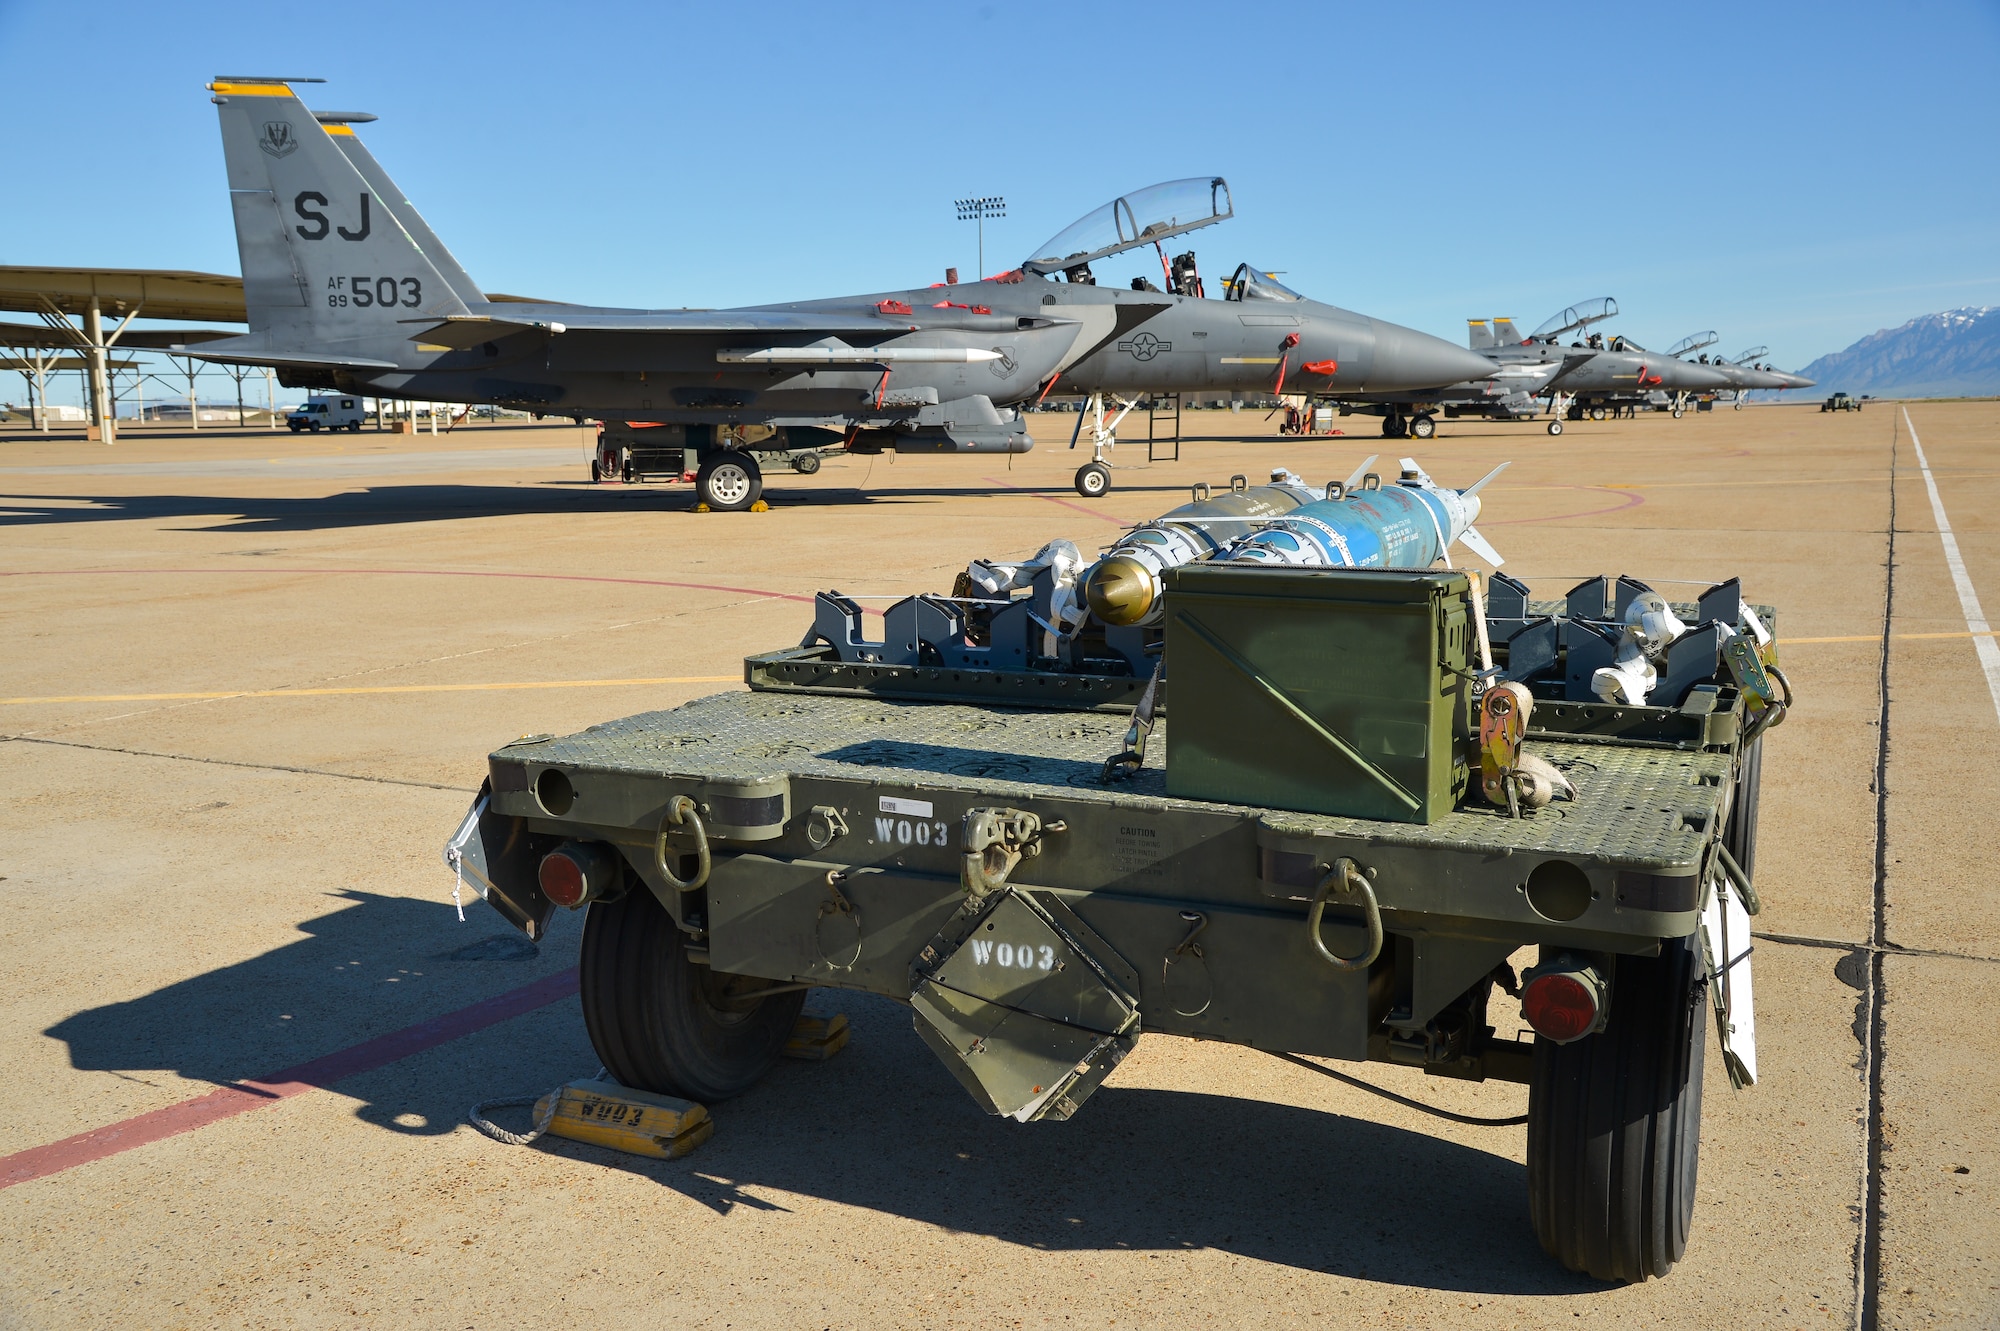 Munitions sit on the aircraft ramp at Hill Air Force Base, Utah, May 3, 2016, waiting to be loaded onto F-15E Strike Eagle aircraft from Seymour Johnson AFB, North Carolina. The F-15Es, along with other fighter and bomber aircraft, participated in the U.S. Air Force air-to-ground weapons evaluation known as Combat Hammer. Combat Hammer, which runs until May 14, tests and validates the performance of crews, pilots and their technology while deploying precision-guided munitions. (U.S. Air Force photo by R. Nial Bradshaw)